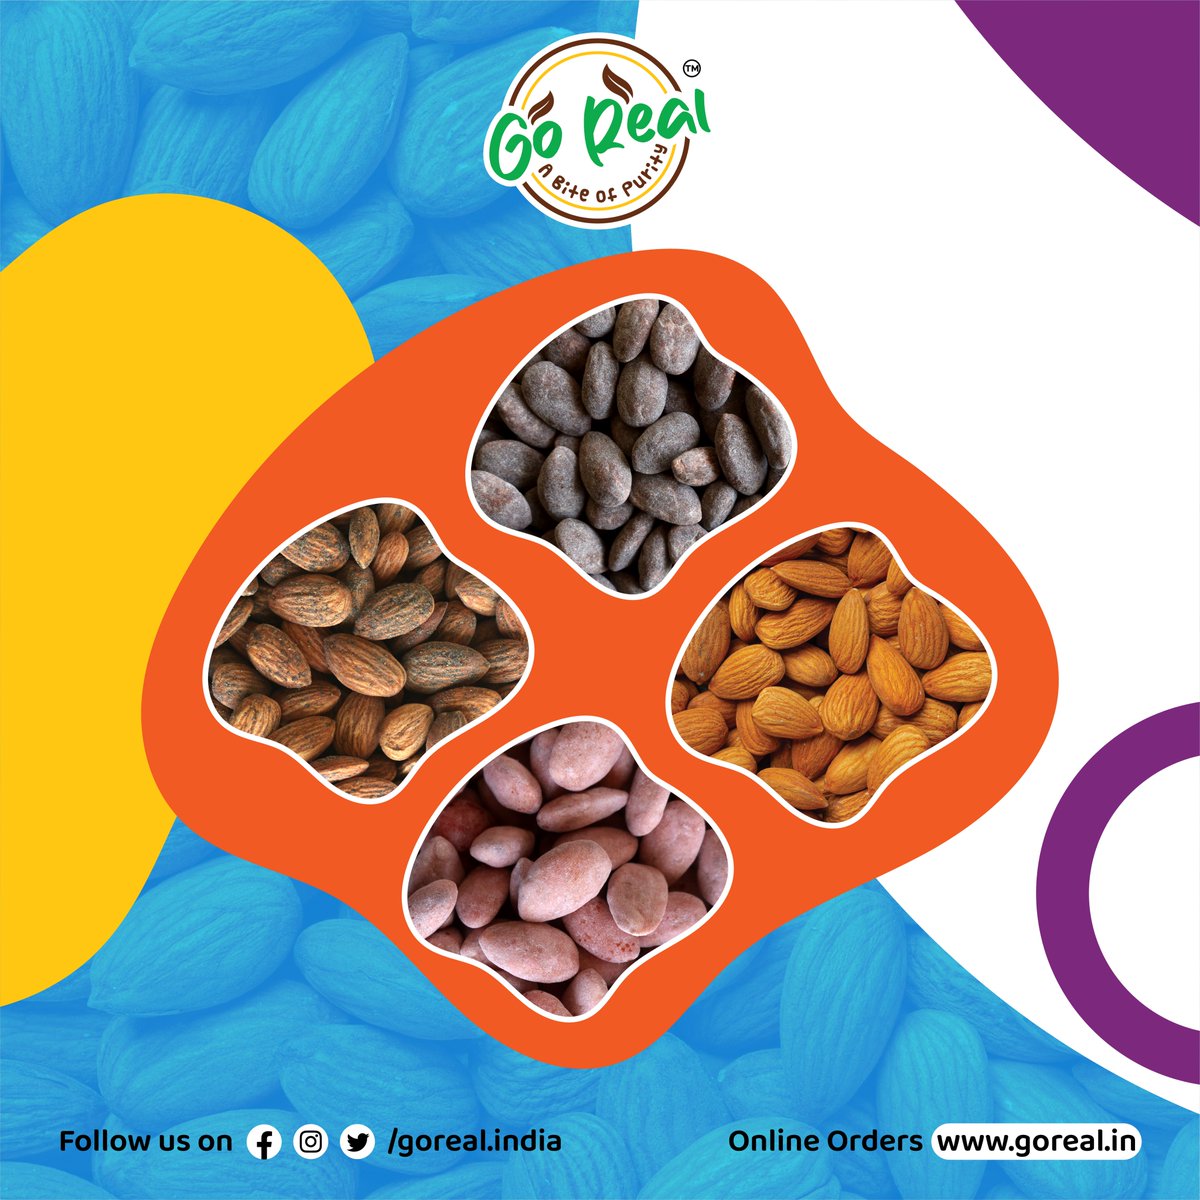 Immerse yourself in the irresistible satisfaction and exquisite flavors of our diverse almond selection🌰✨
.
.
#nutty #delights #satisfying #exquisite #almond #nutsfornuts #cravings #tastesensation  #goreal #biteofpurity